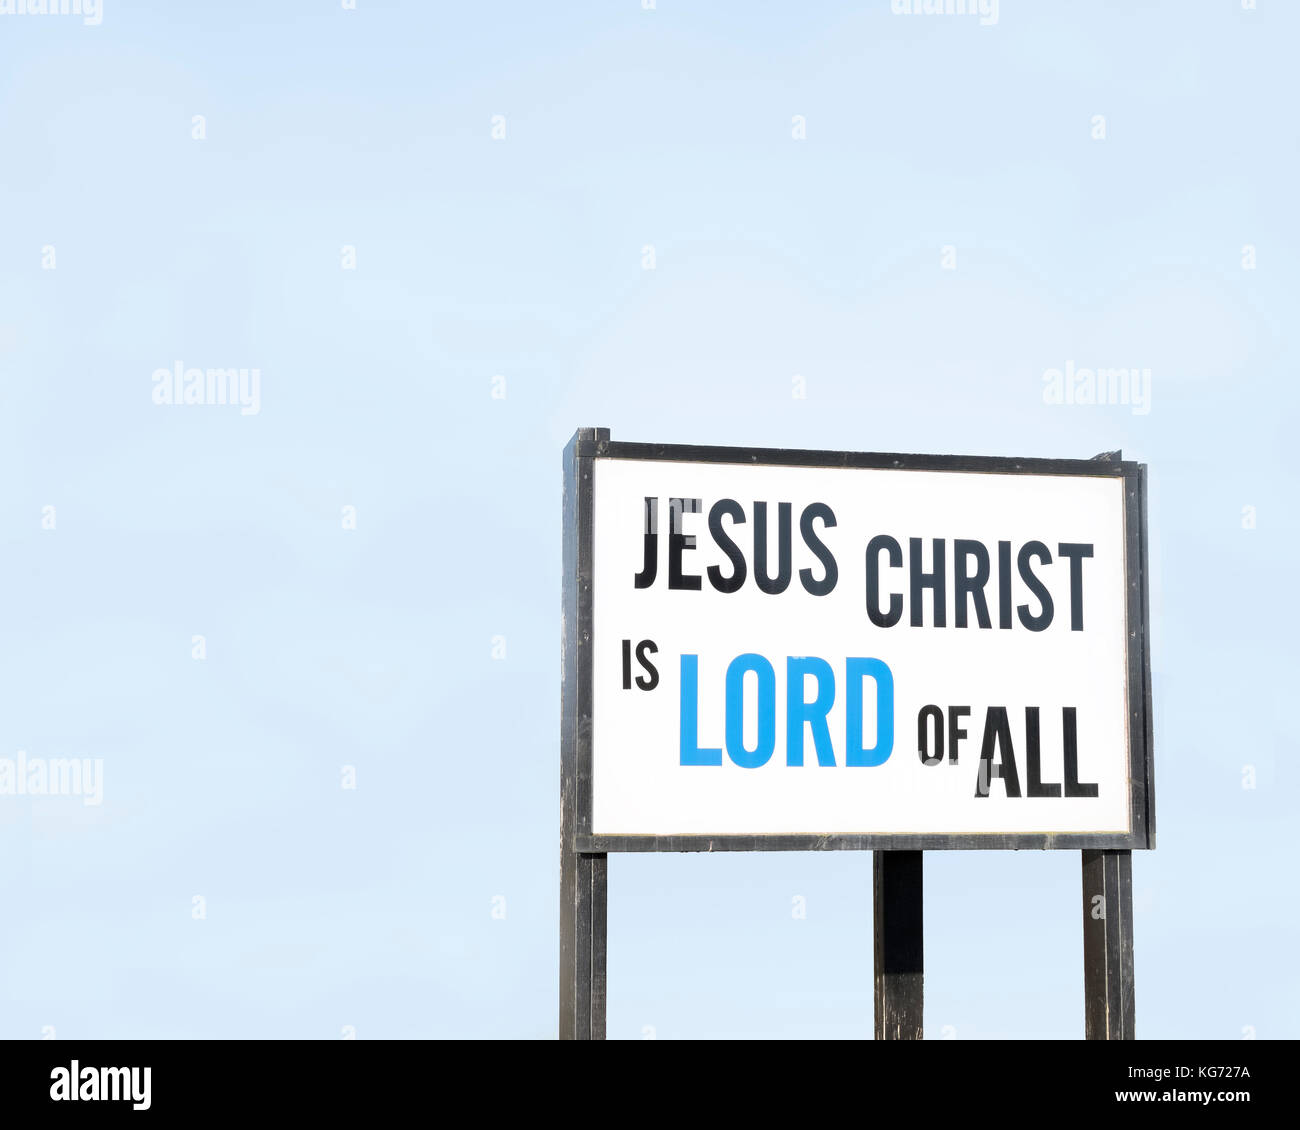 Jesus Christ Is Lord Of All Sign Against Blue Sky Stock Photo